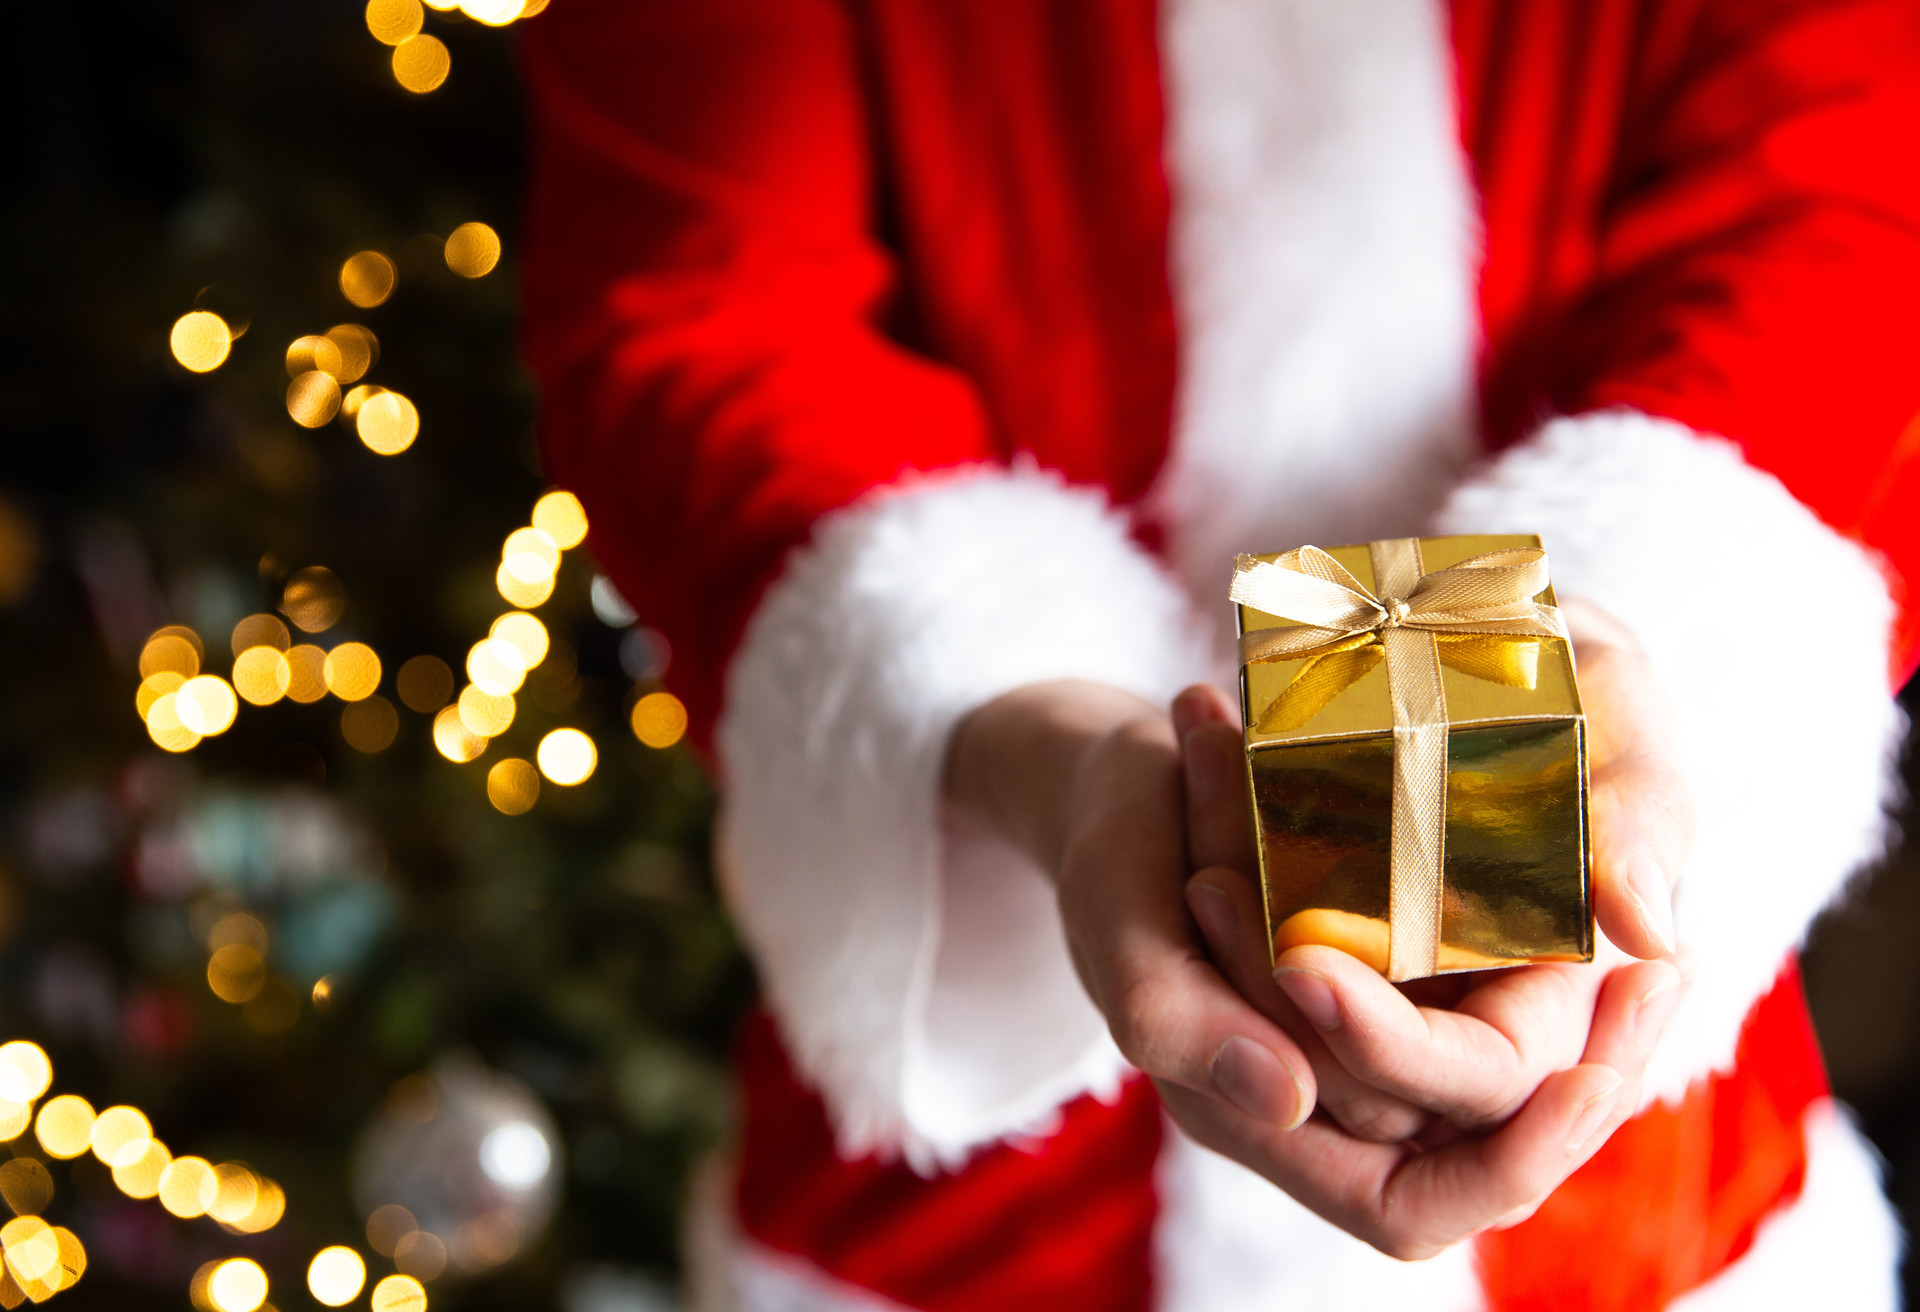 Man in Santa Claus costume near Christmas tree holding a golden gift box, Christmas present background with bokeh lights beauty